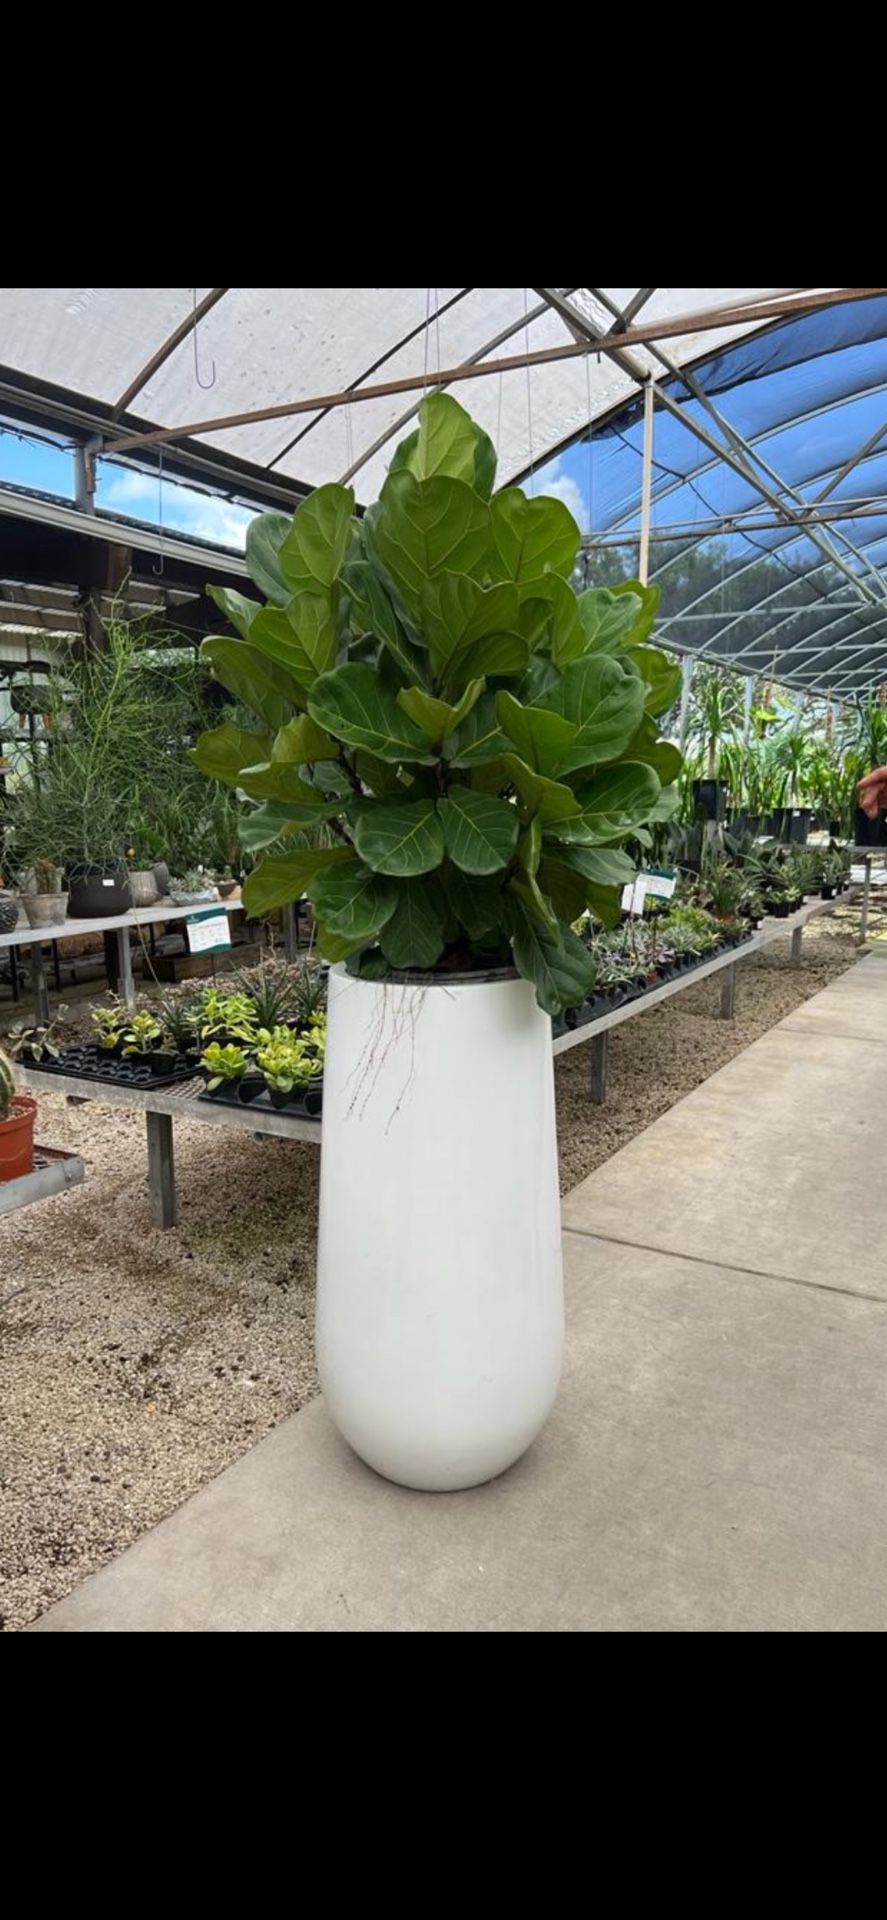 New!!! Big And Beautiful Glossy Pot 40” (Plant Not Included) Was $600